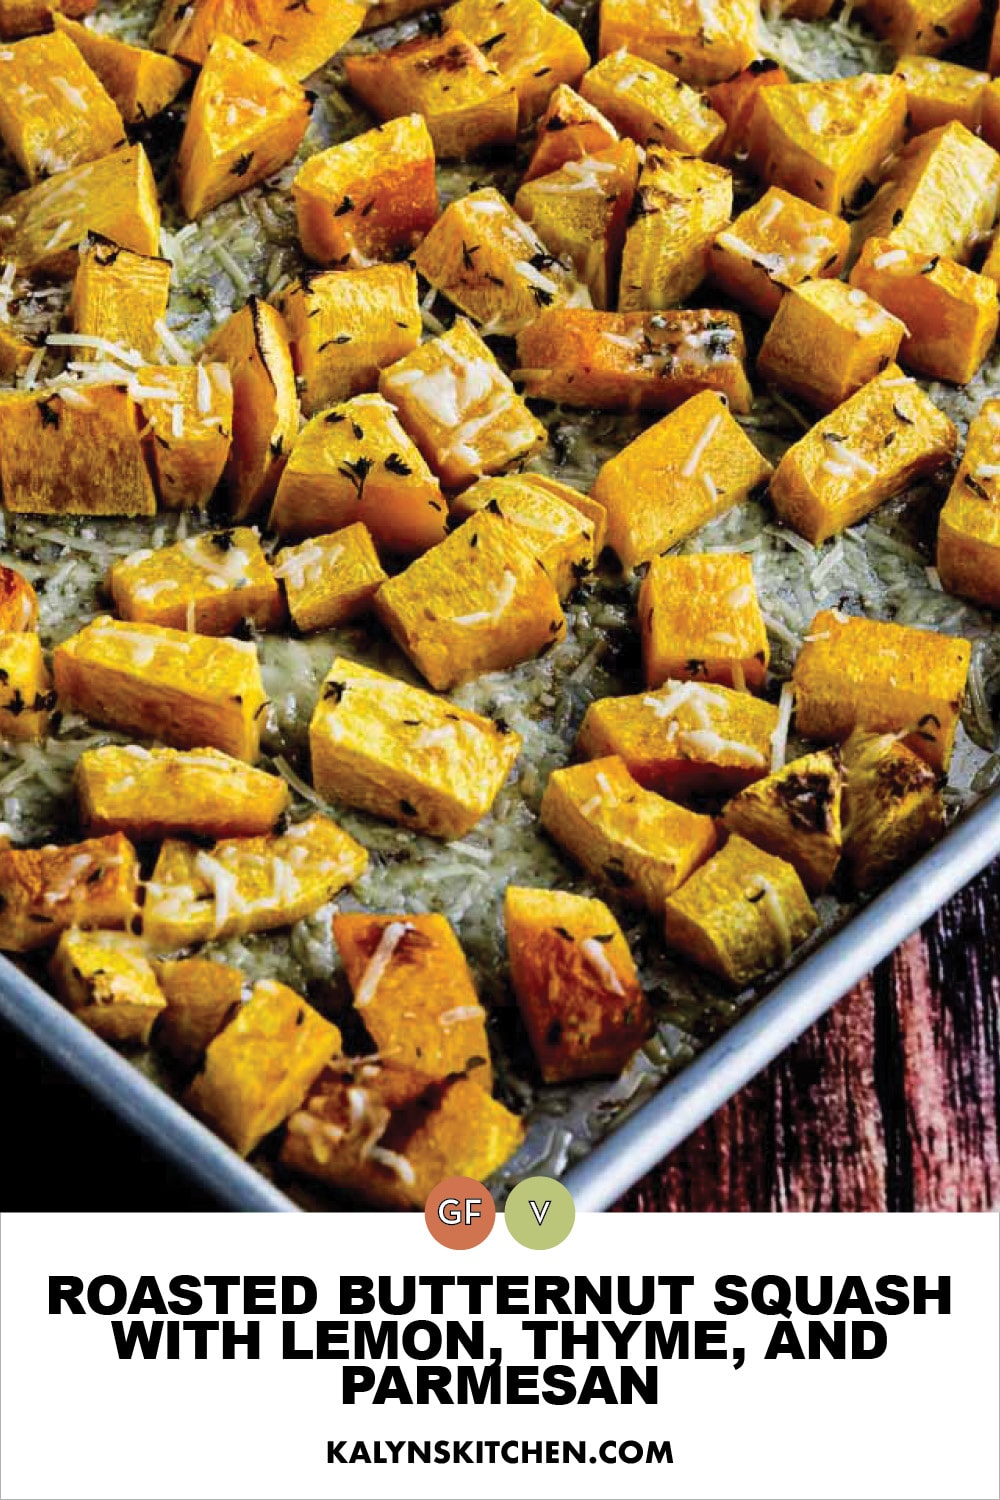 Pinterest image of Roasted Butternut Squash with Lemon, Thyme, and Parmesan